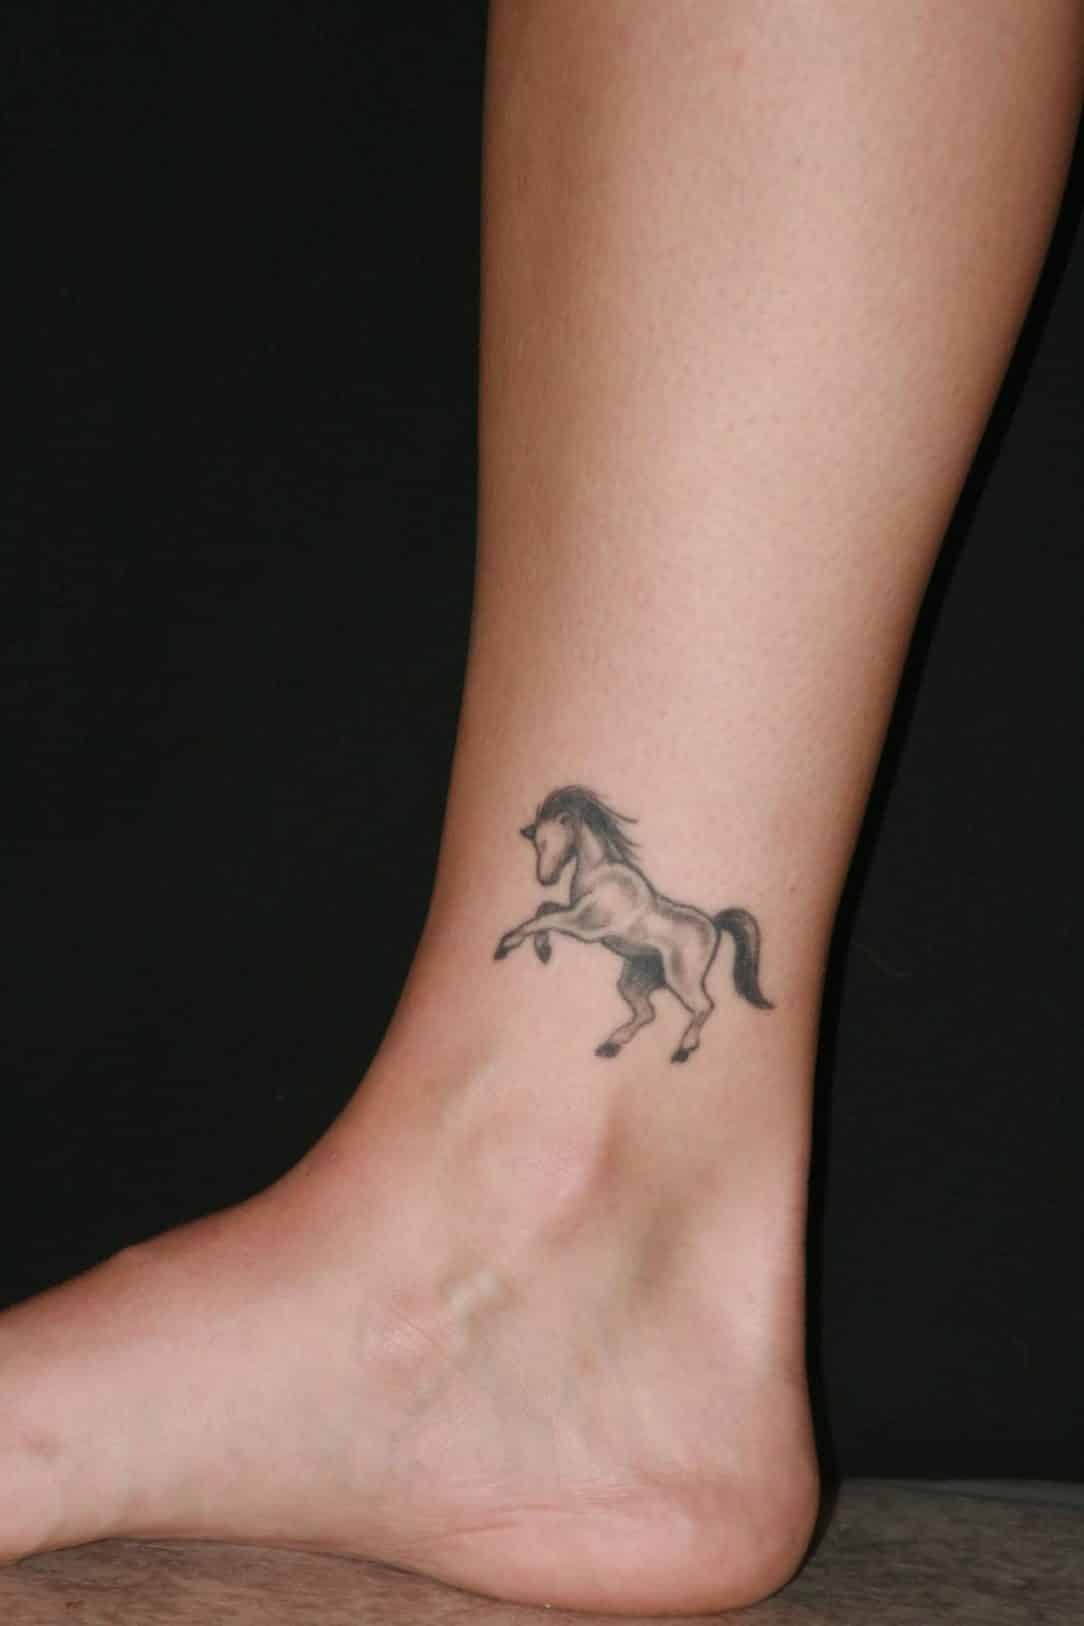 Ankle Tattoos for Men - Ideas and Designs for Guys